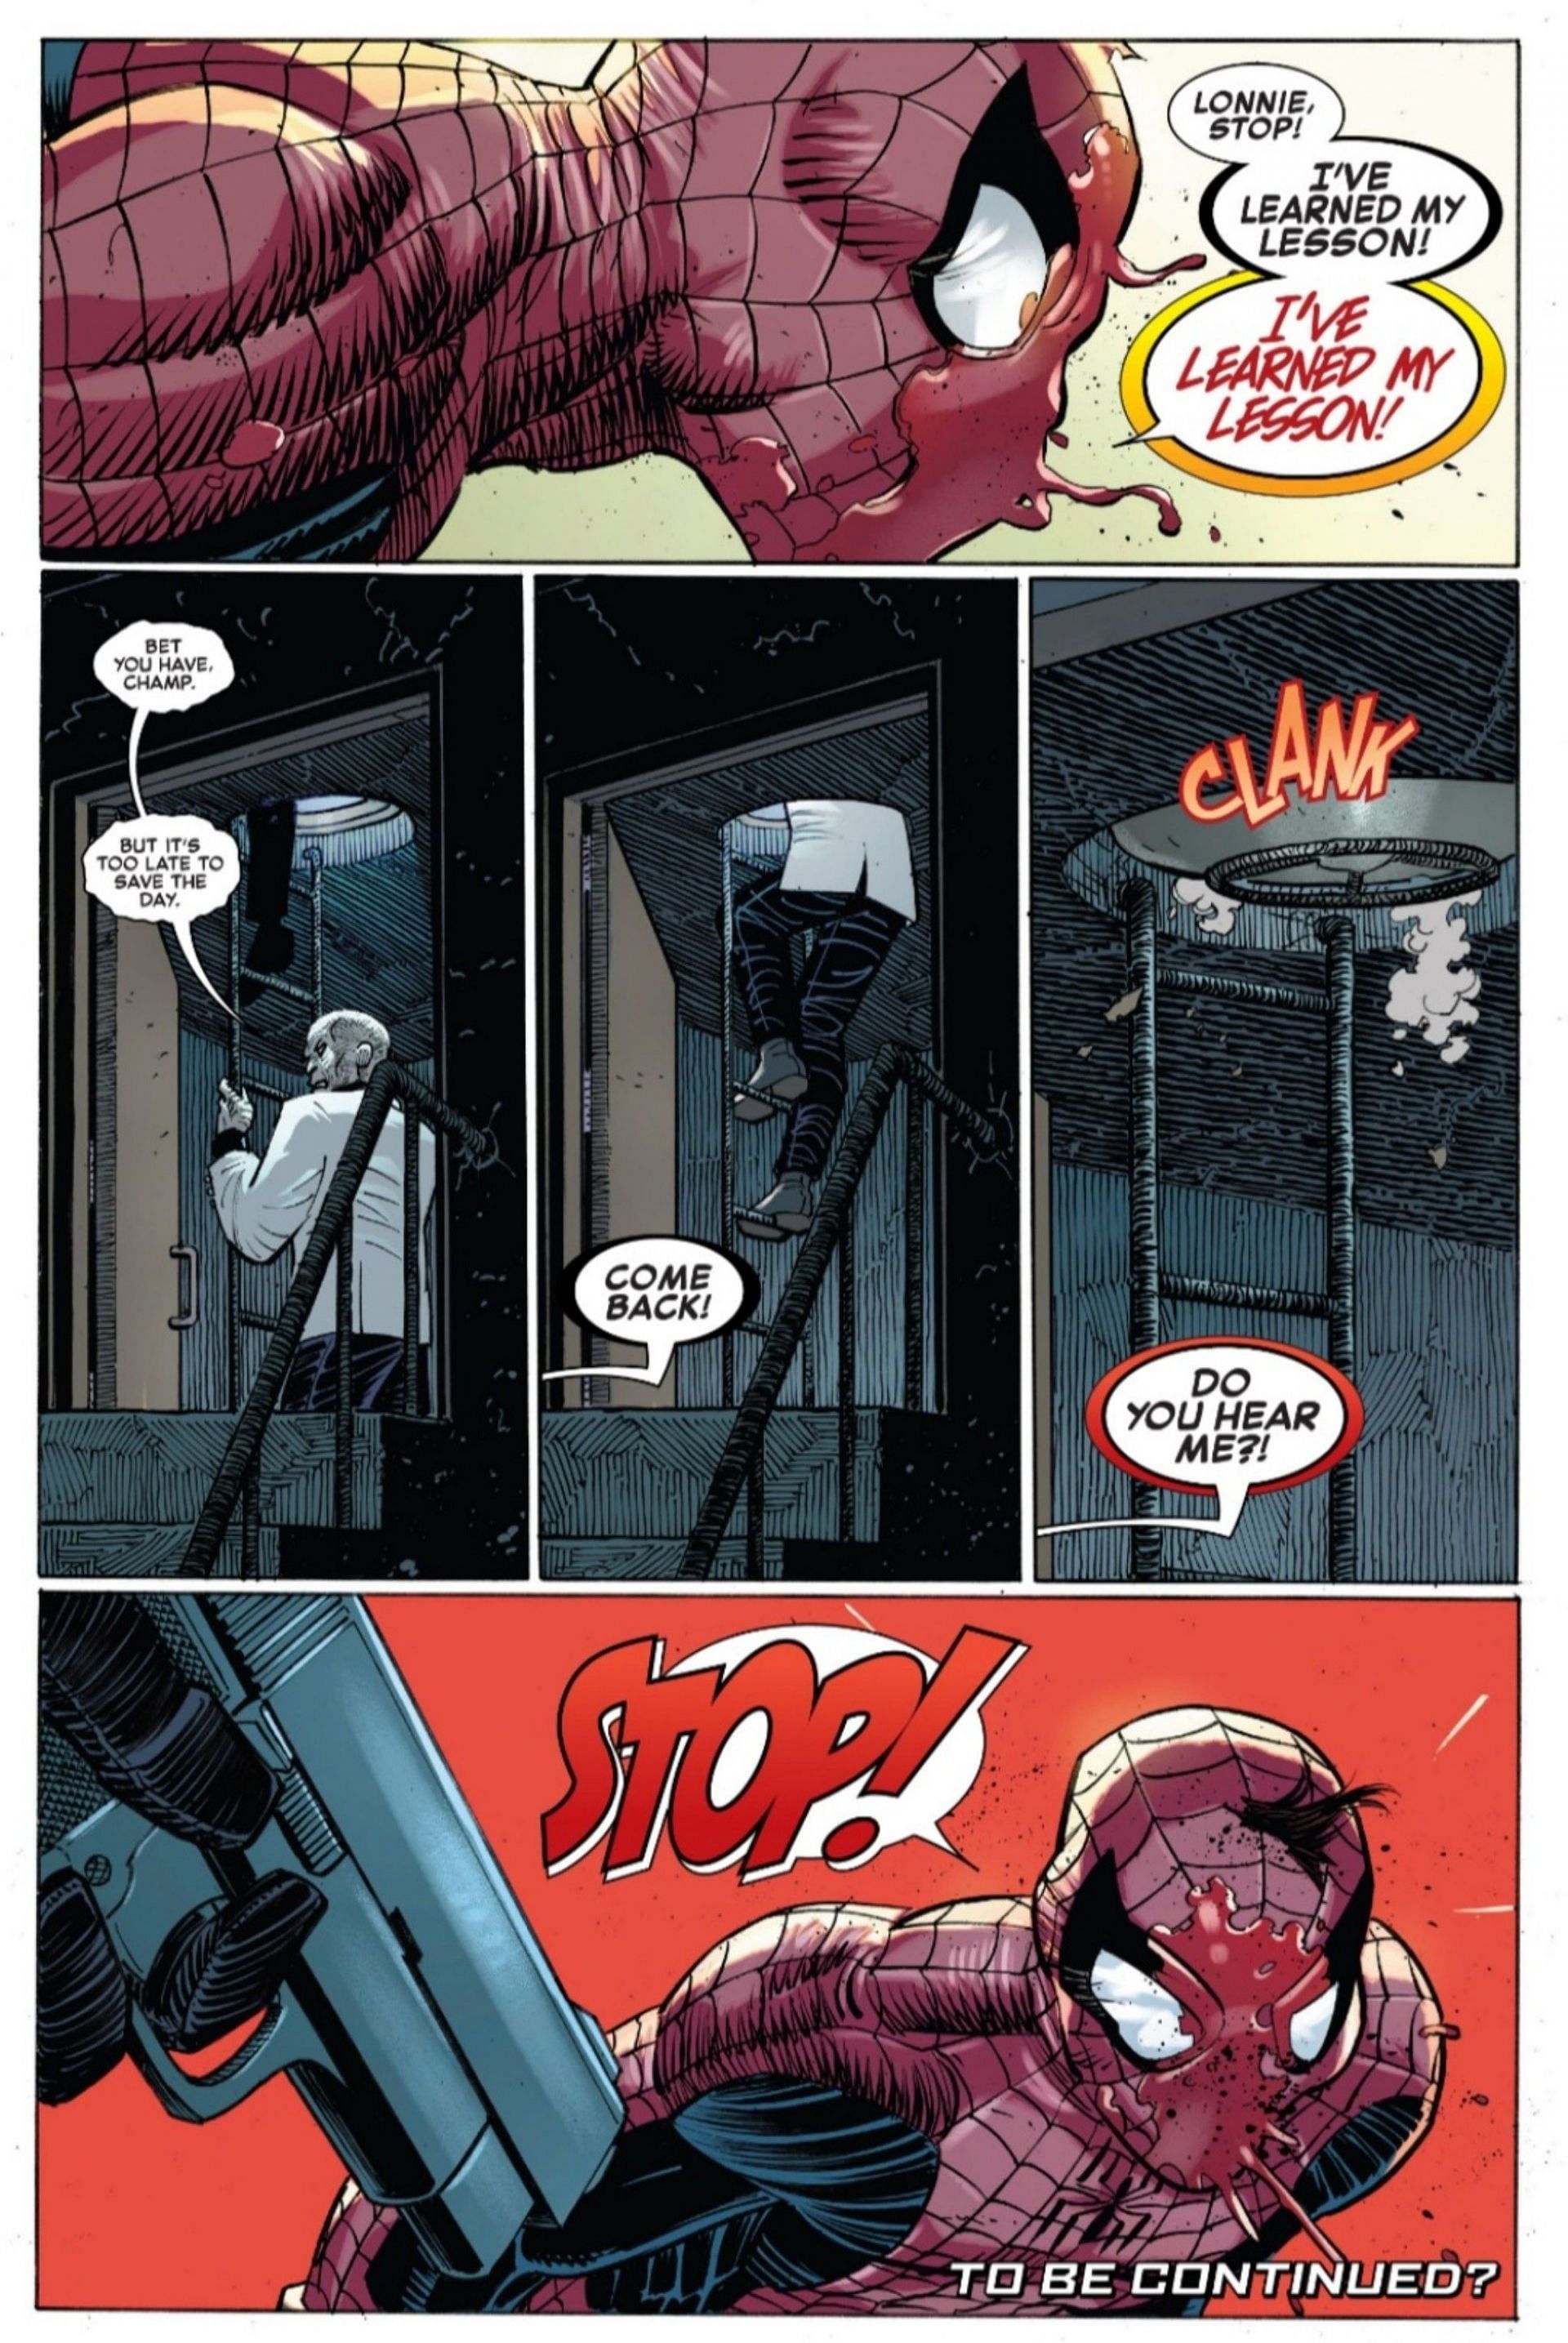 A page from The Amazing Spider-Man #3 (Image via Marvel Comics)